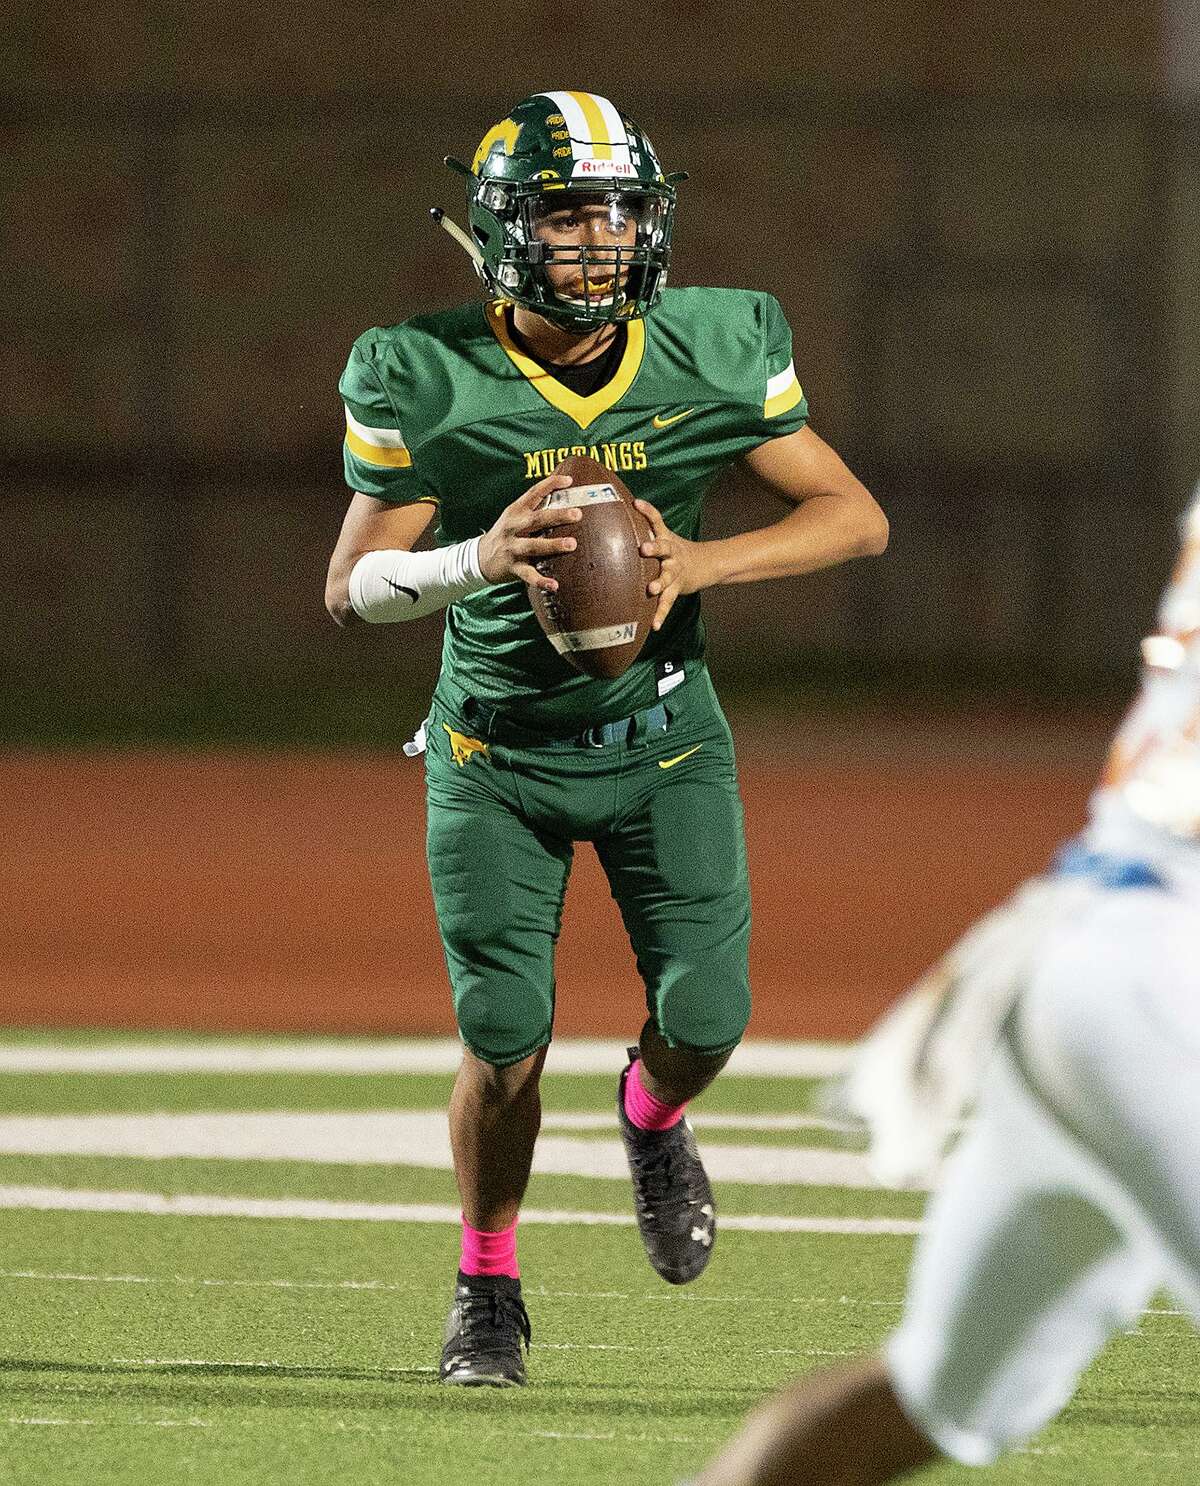 Raymundo Gonzalez and the Nixon Mustangs will play their spring game May 11.